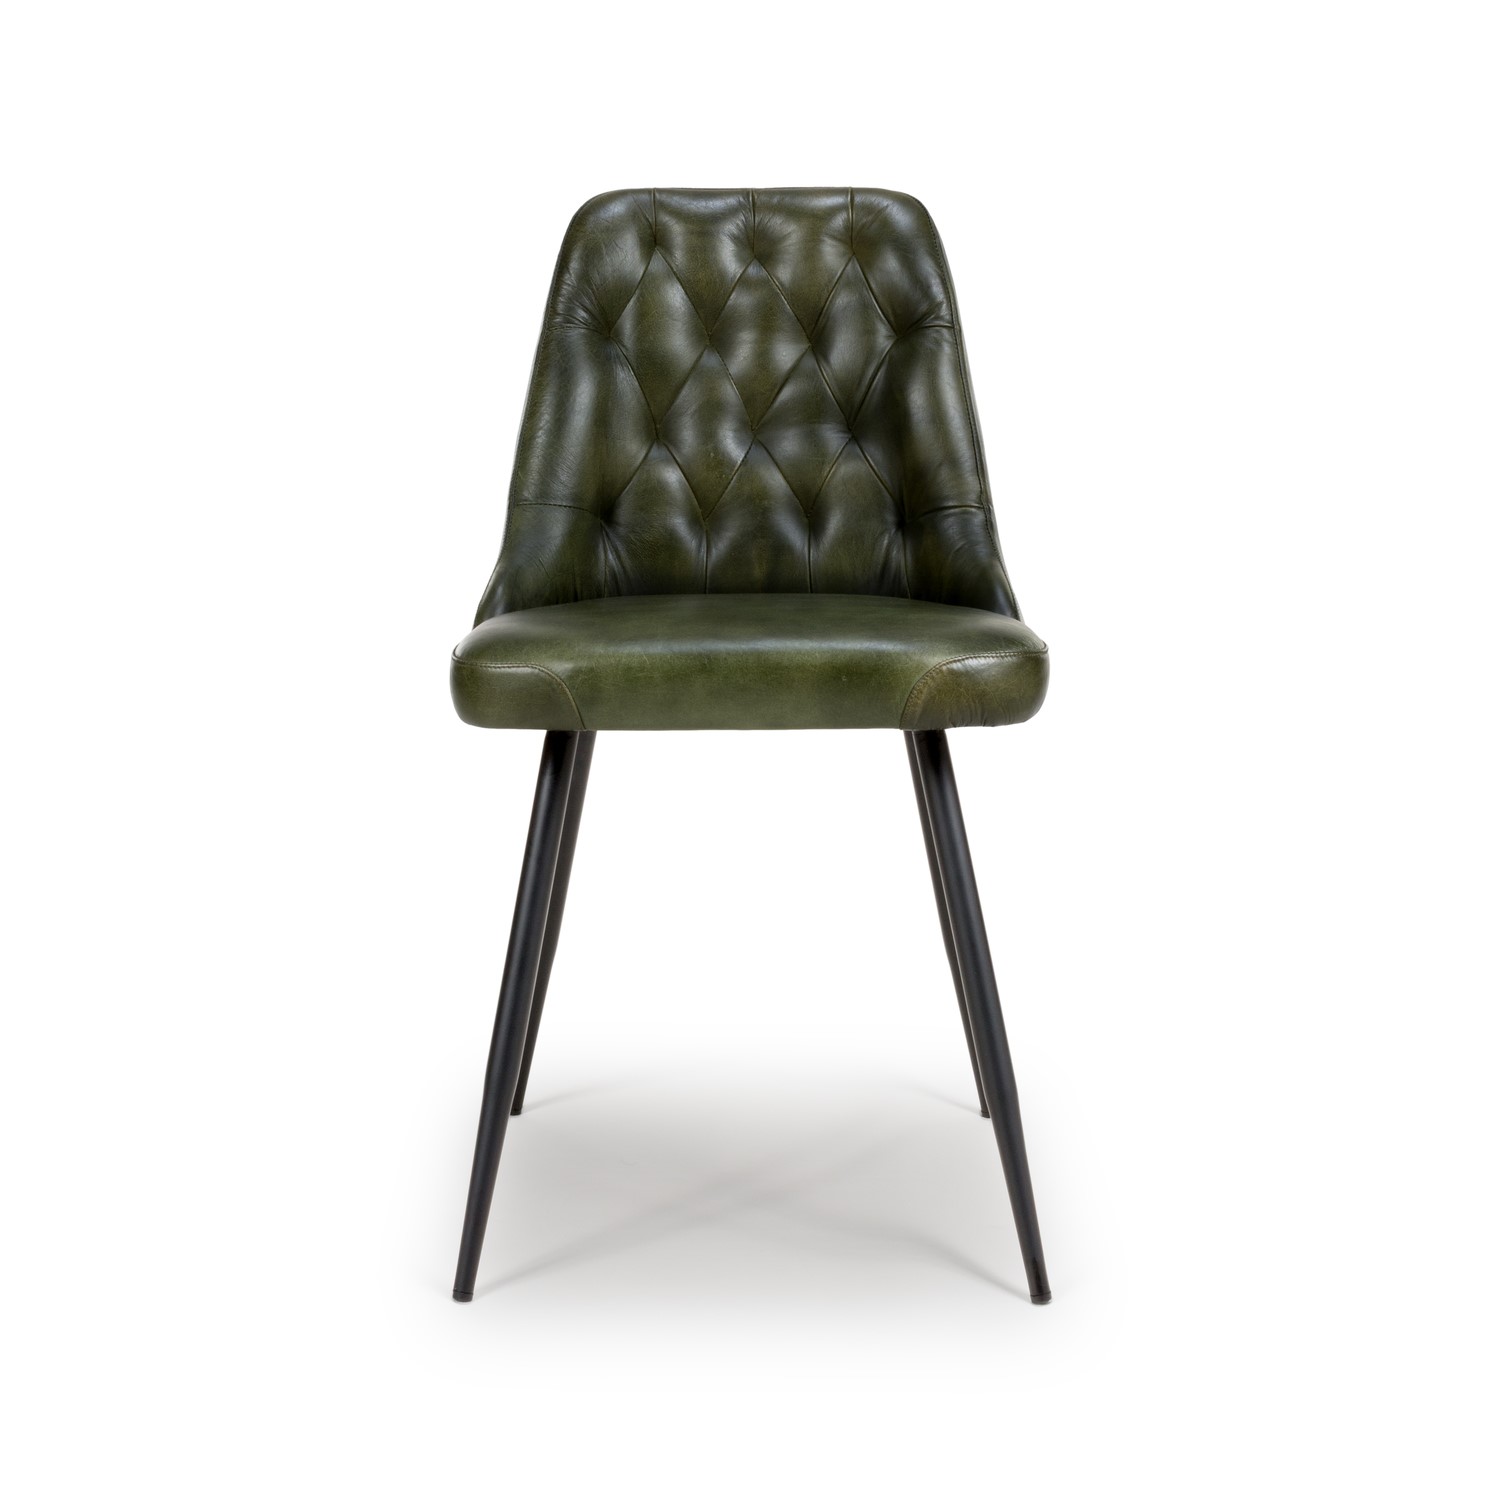 Read more about Set of 2 real leather green dining chair with quilted back jaxson